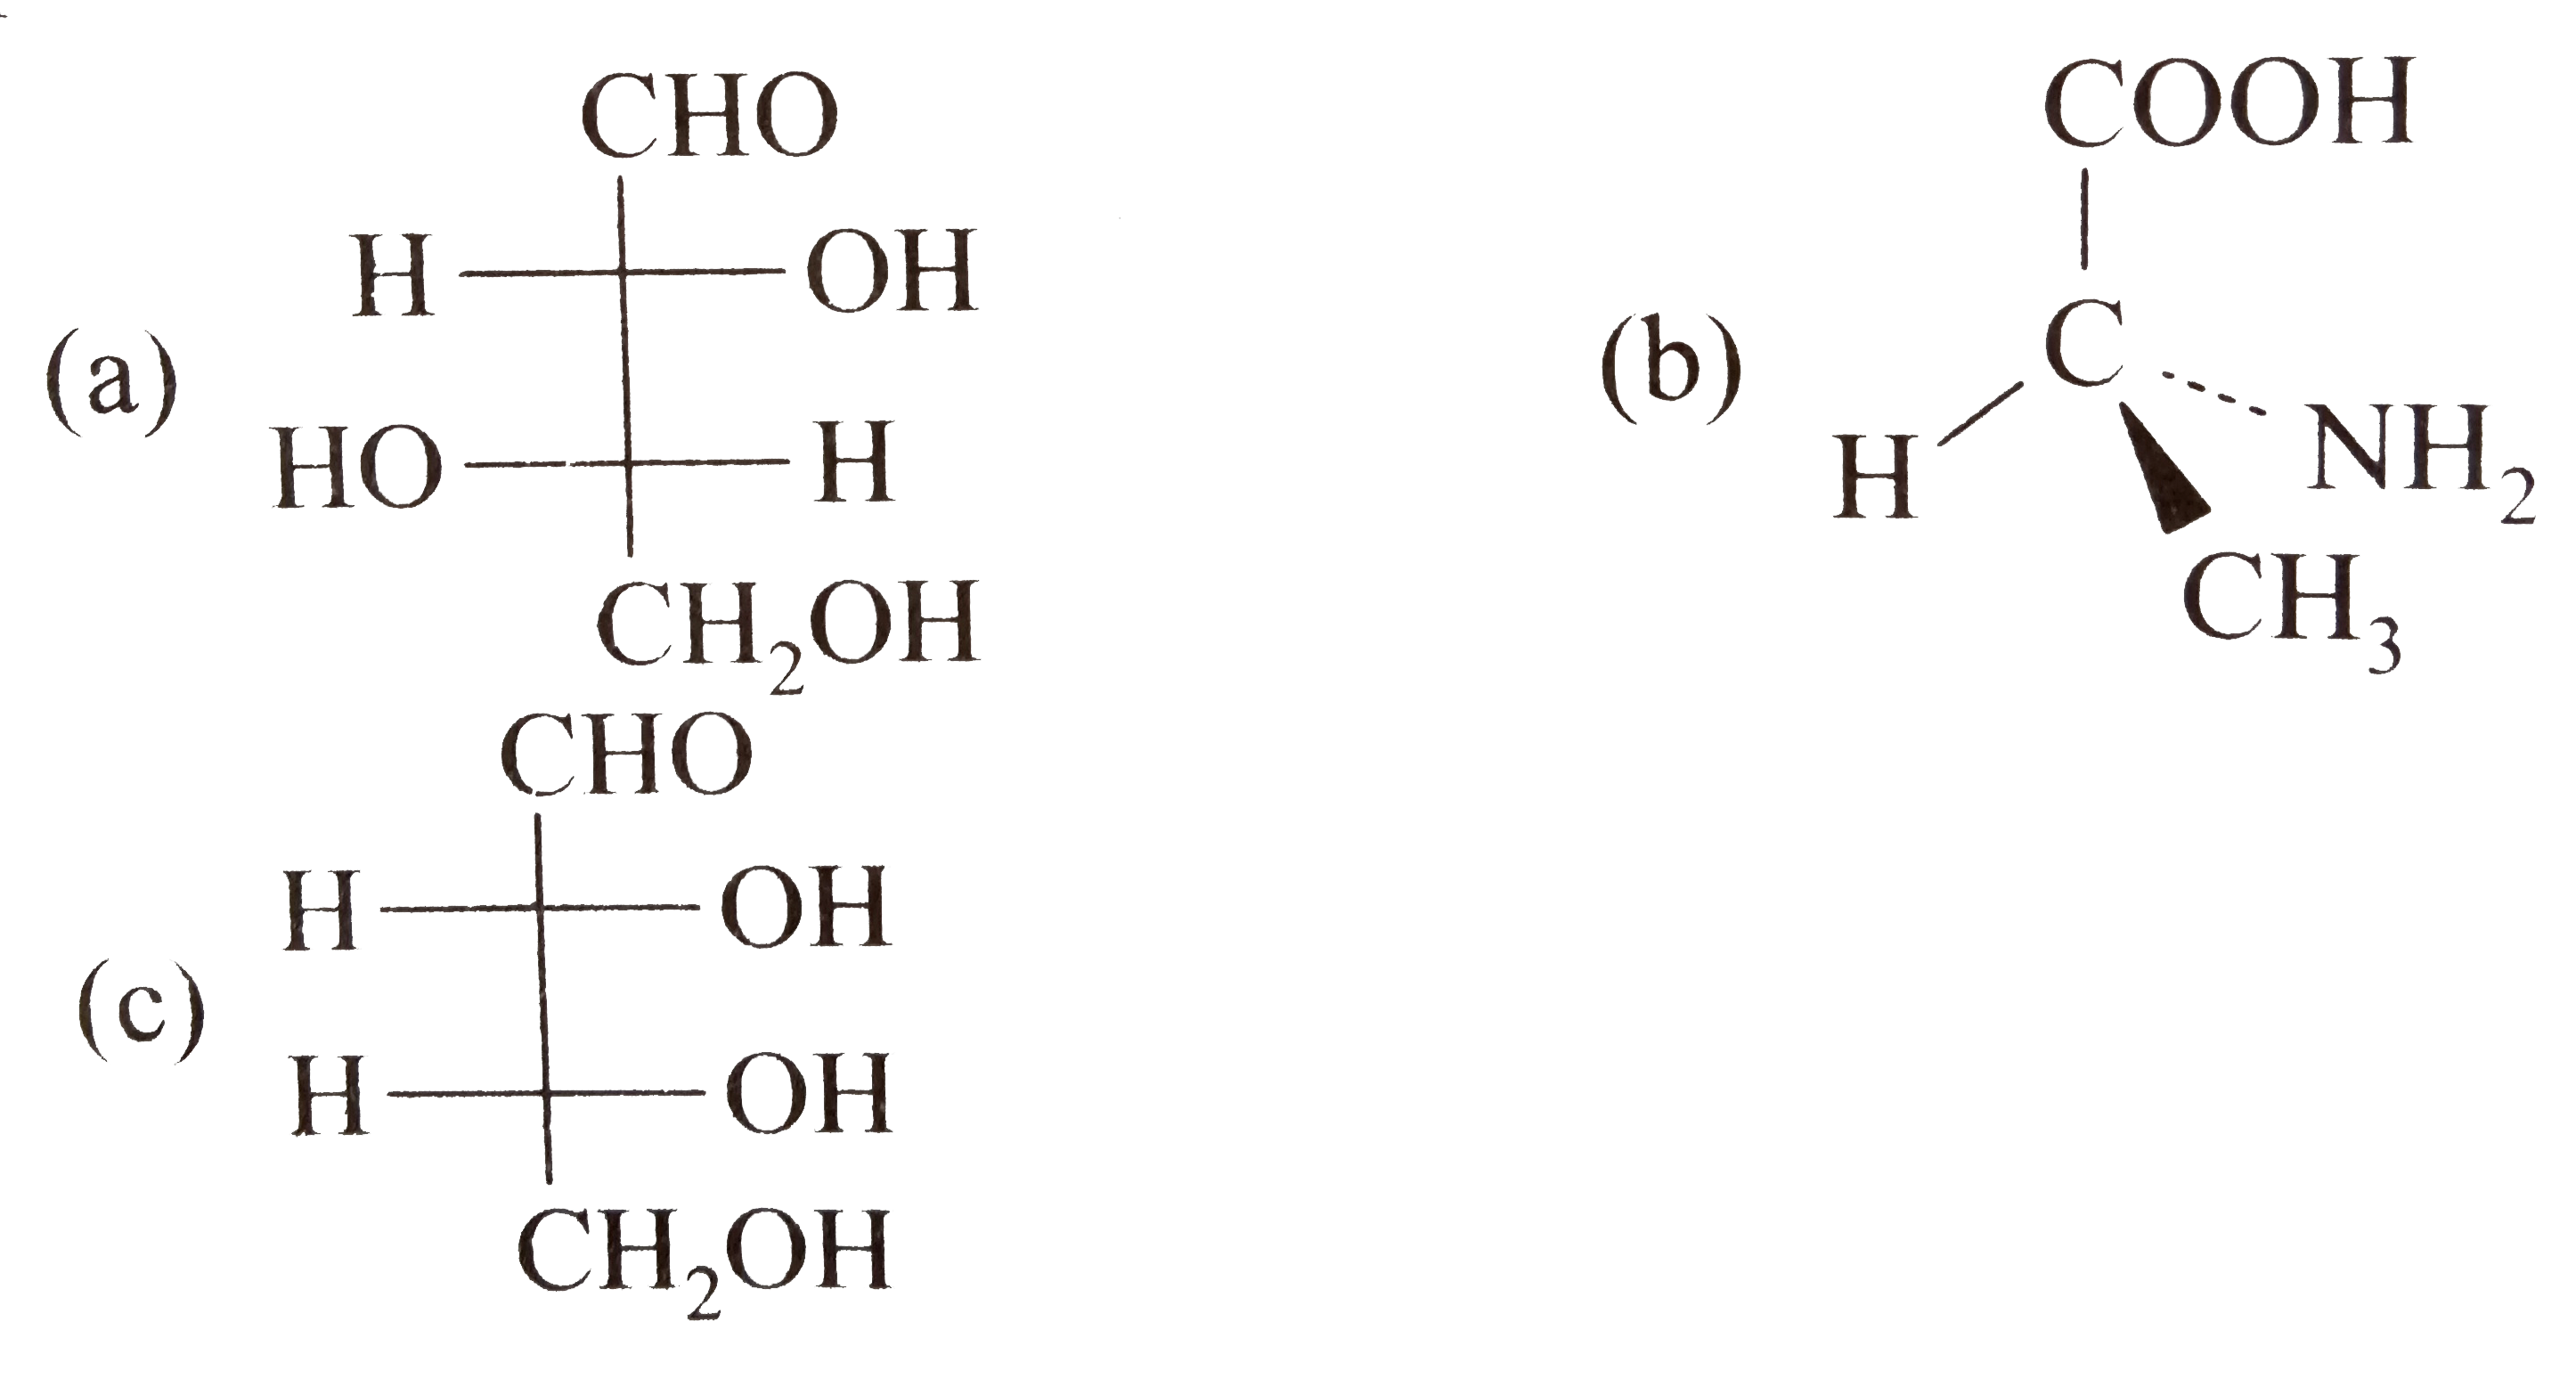 Specify the configuration of the following compounds in D or L designation.    (a)    Strategy: The sterochemicla descriptor D refers to an arrangement about a centre of chirality that is identical to the three-dimensional arrangement in D-(+)-glyceraldehyde in which the OH group on the chiral centre is on the right in the Fischer projection. Similarly, the other enatiomer of glyceraldehyde, which has OH group on the chiral centre to the left is given L configuration. For carbohydrates (polyhdroxy aldehydes or ketones) the focus should be on the last chiral carbon (from the top) while for amino acids the focus should be on the chiral carbon carrying the NH(2) group.